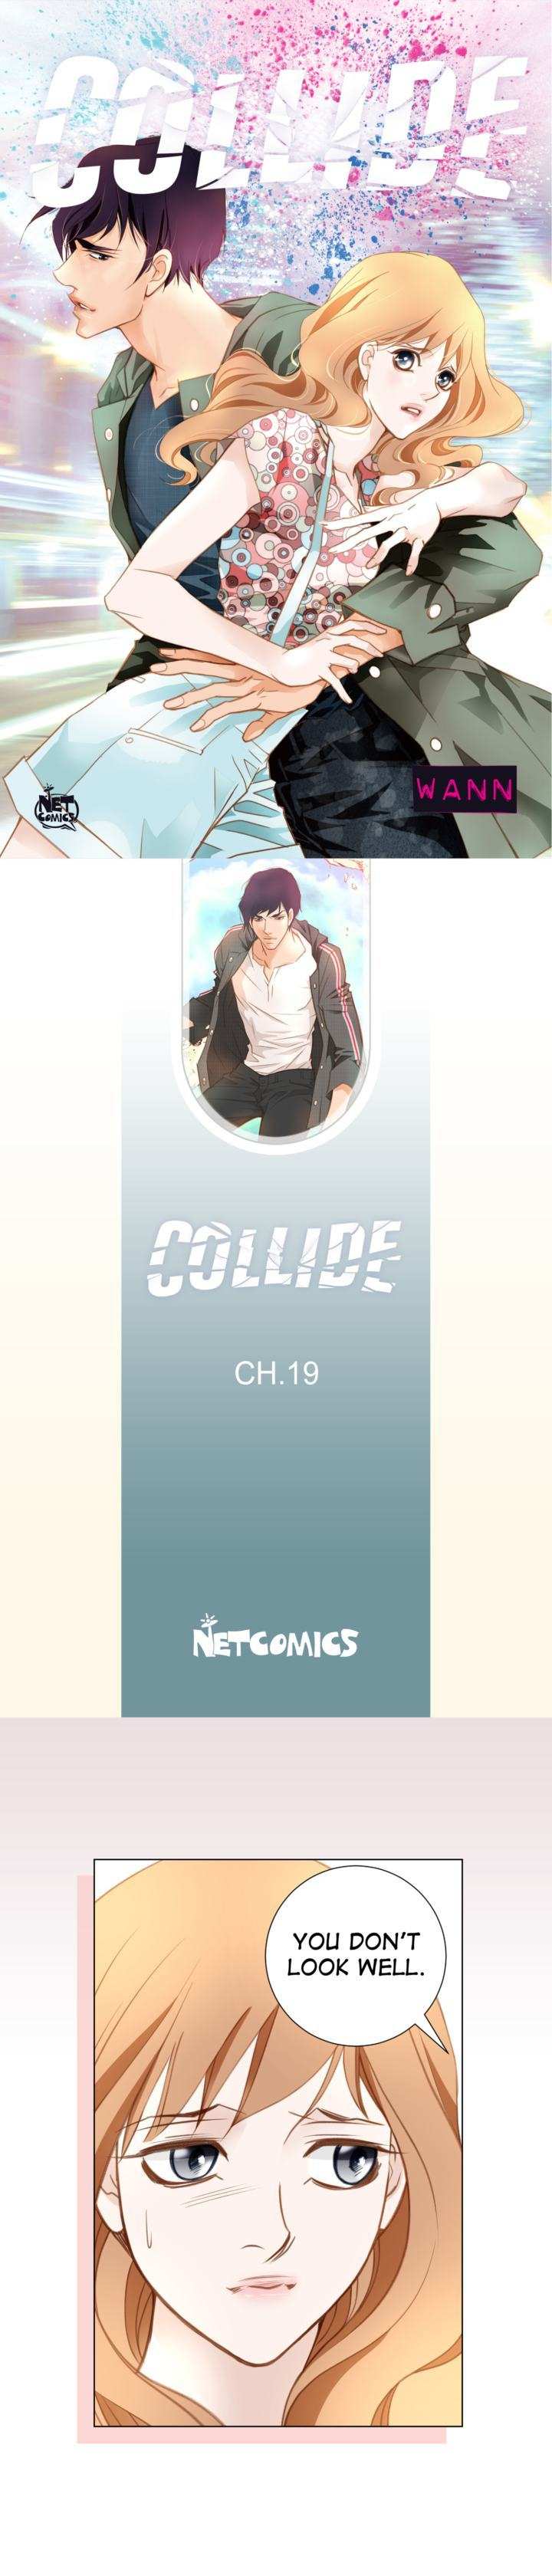 Collide Chapter 19 - page 1